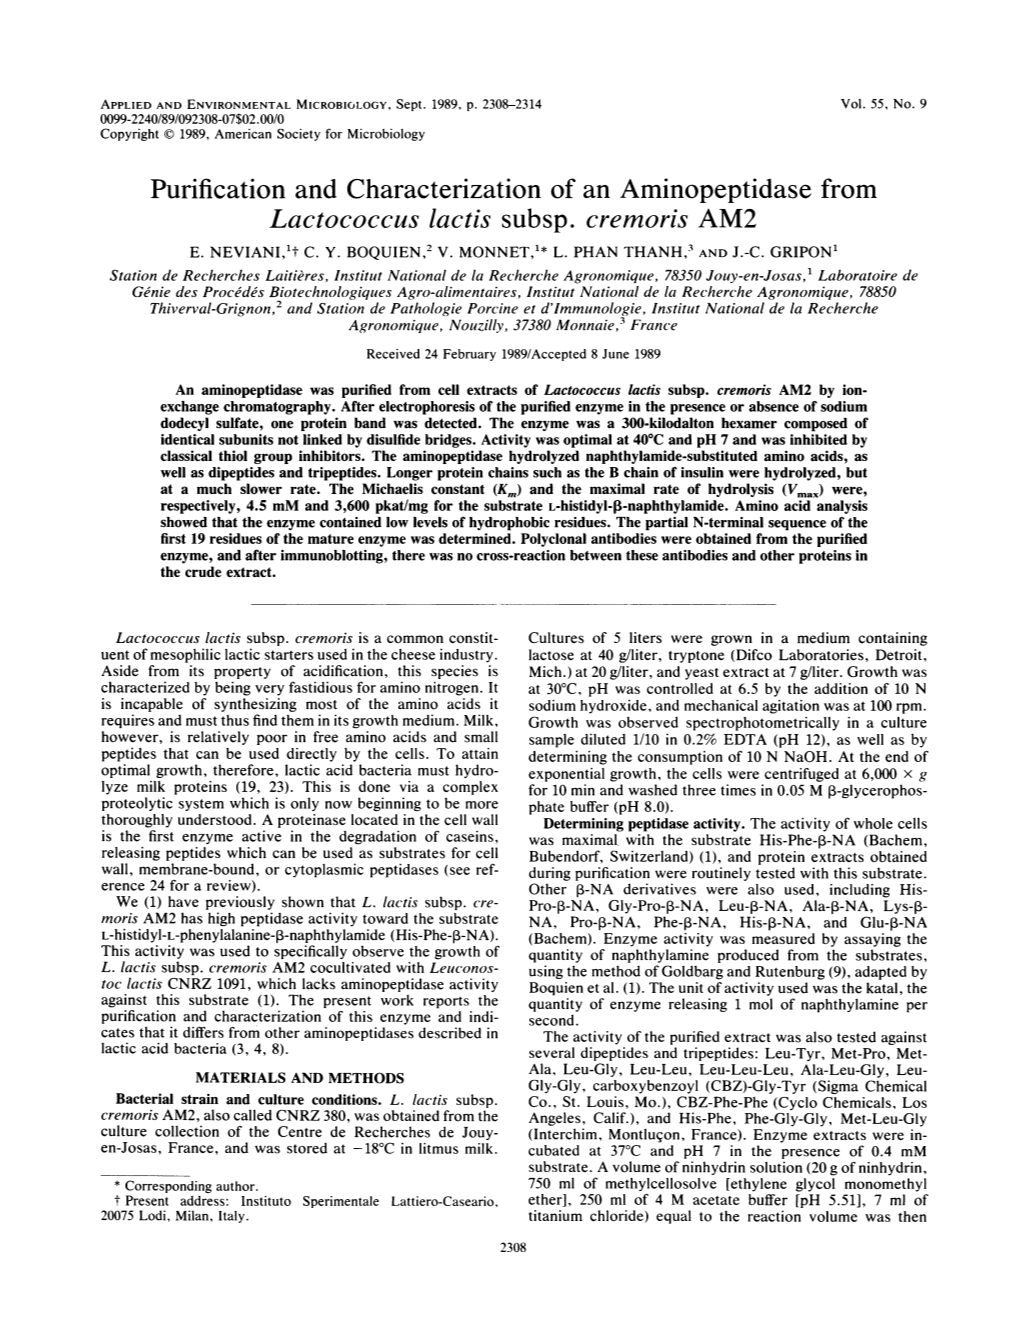 Purification and Characterization of an Aminopeptidase from Lactococcus Lactis Subsp